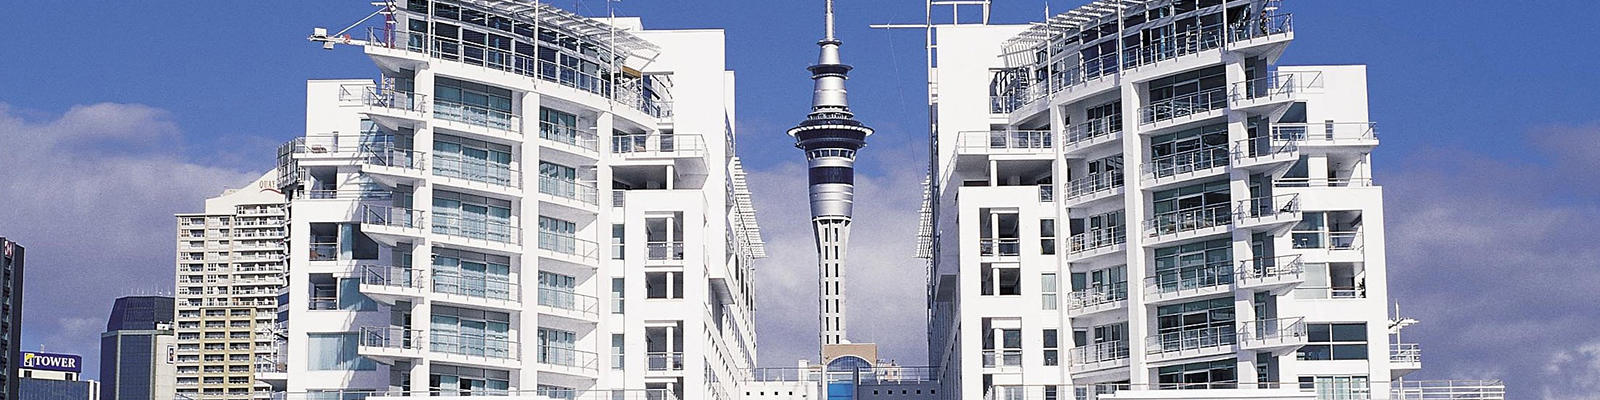 auckland hilton with skytower behind